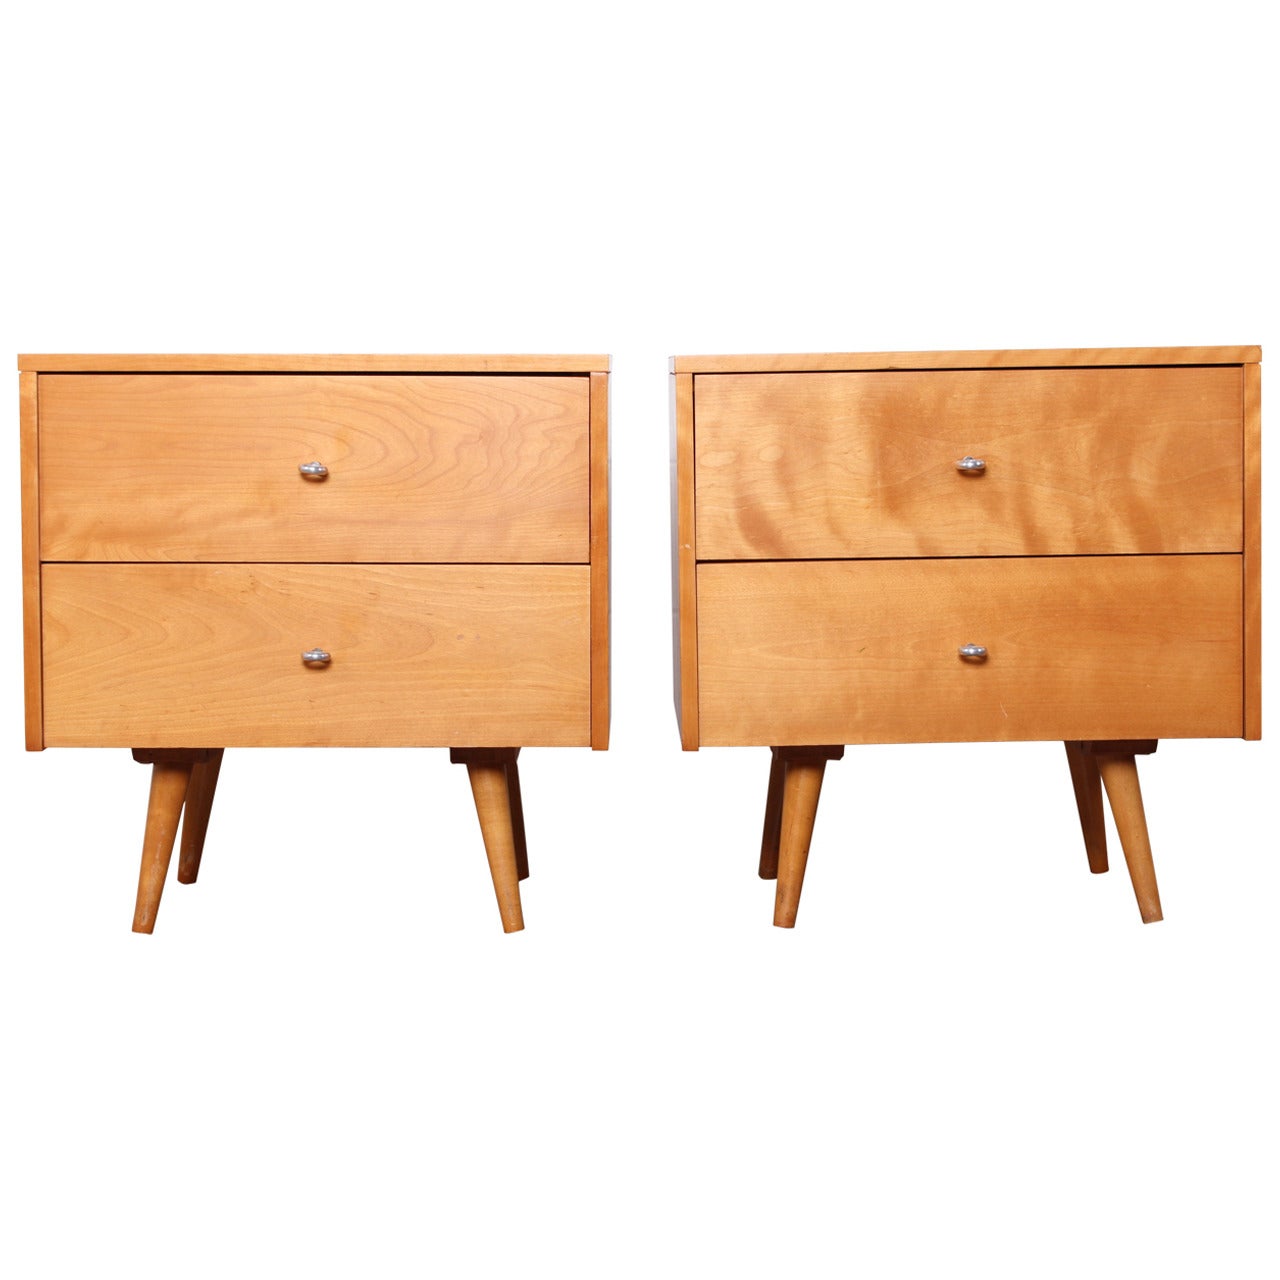 Pair of Nightstands by Paul McCobb for Winchendon